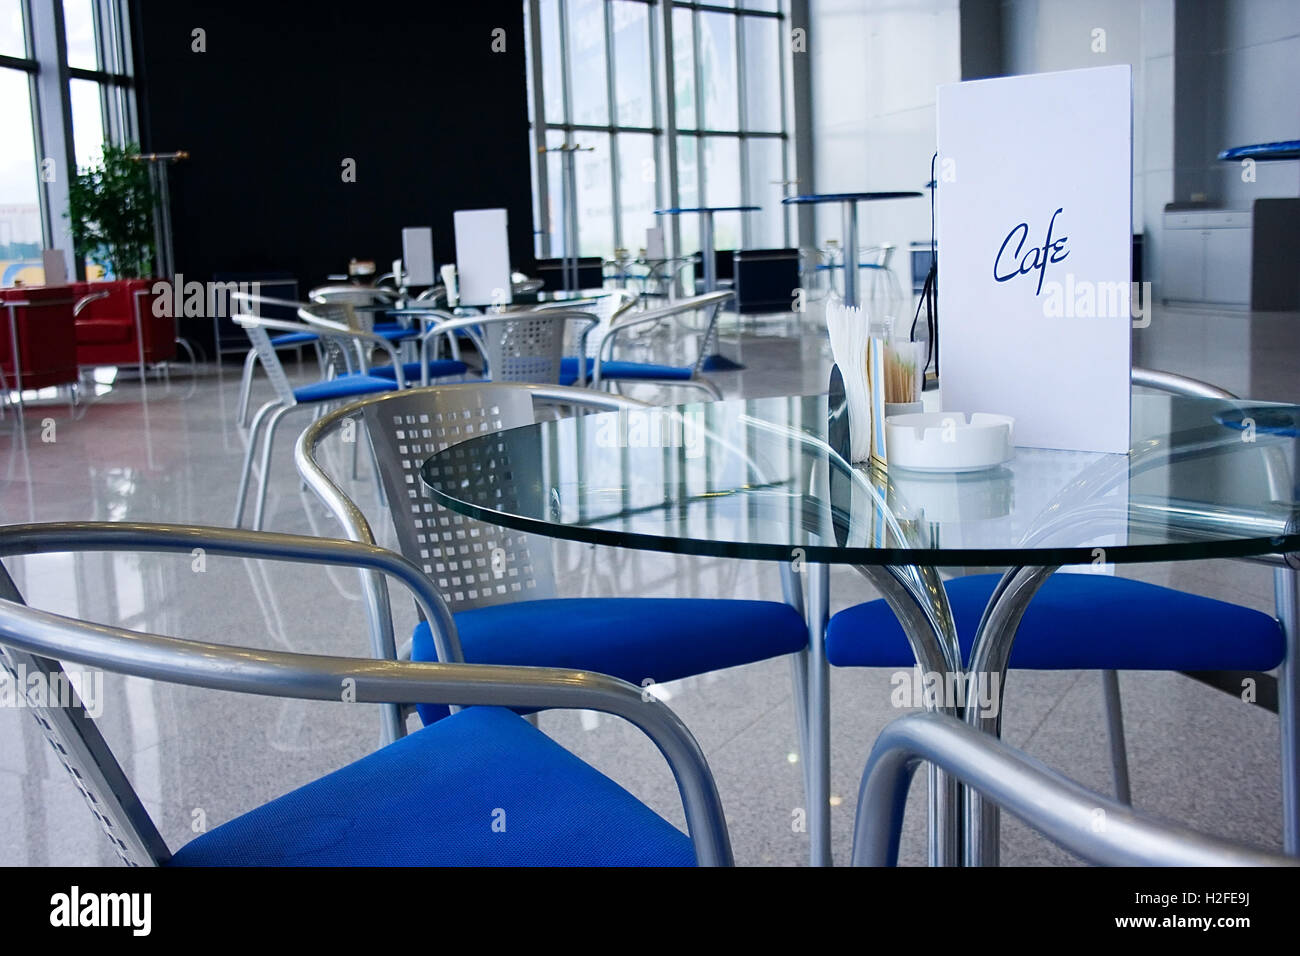 Modern cafe interior with glassy tables, large windows, stone floor and reflections. Stock Photo